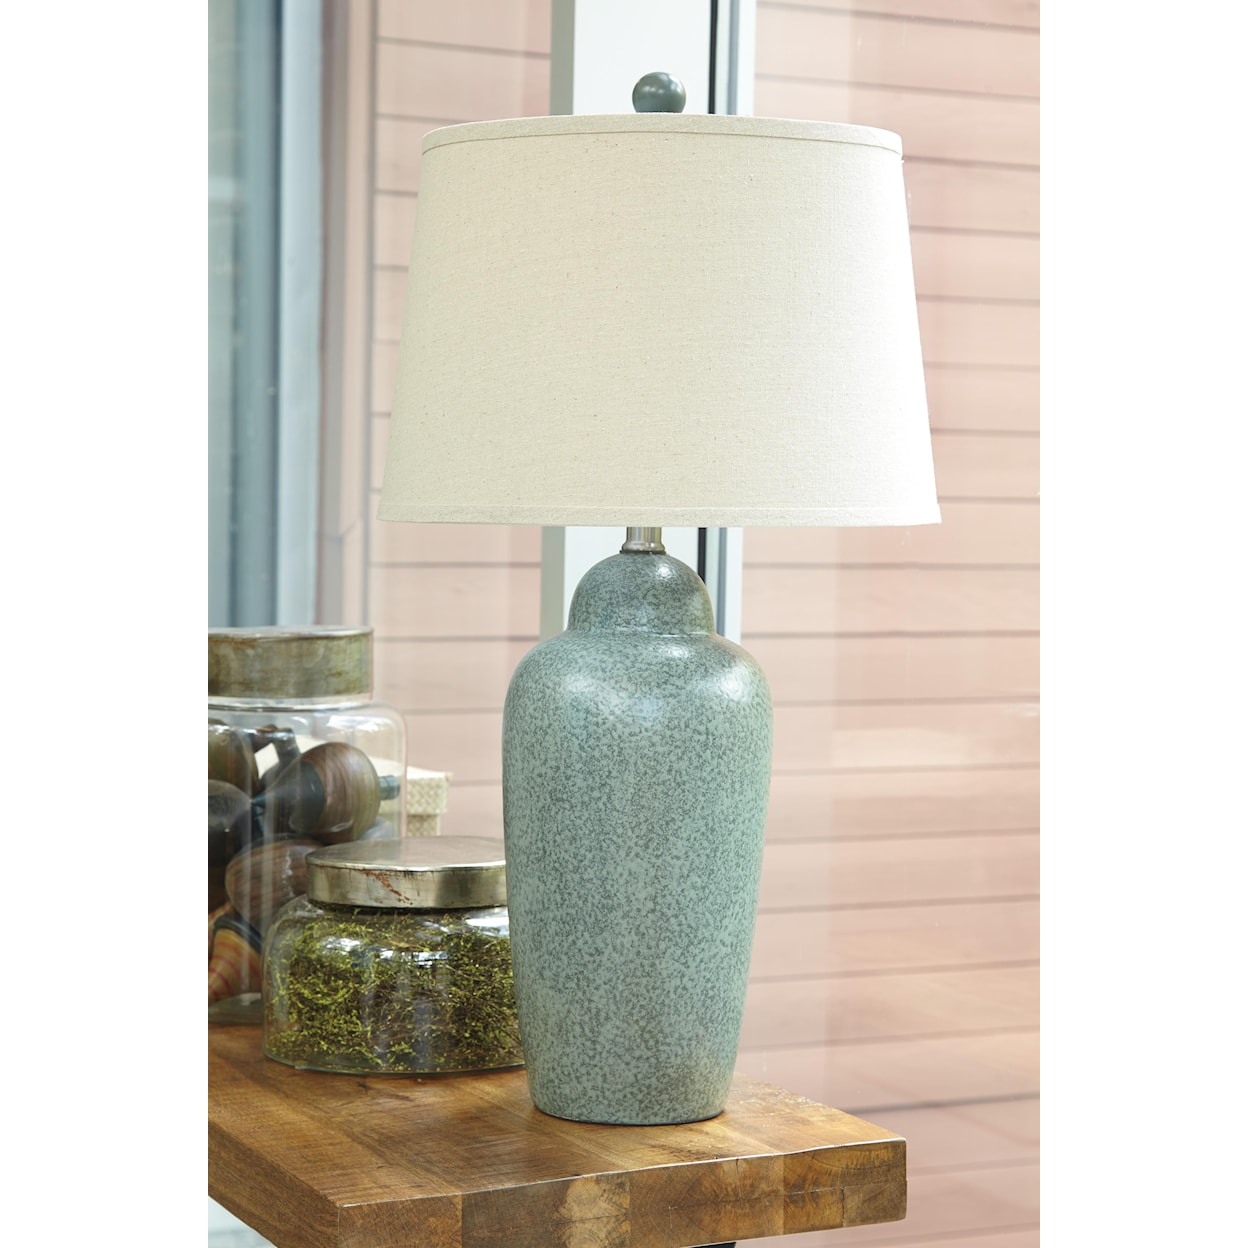 Benchcraft Lamps - Contemporary Ceramic Table Lamp 